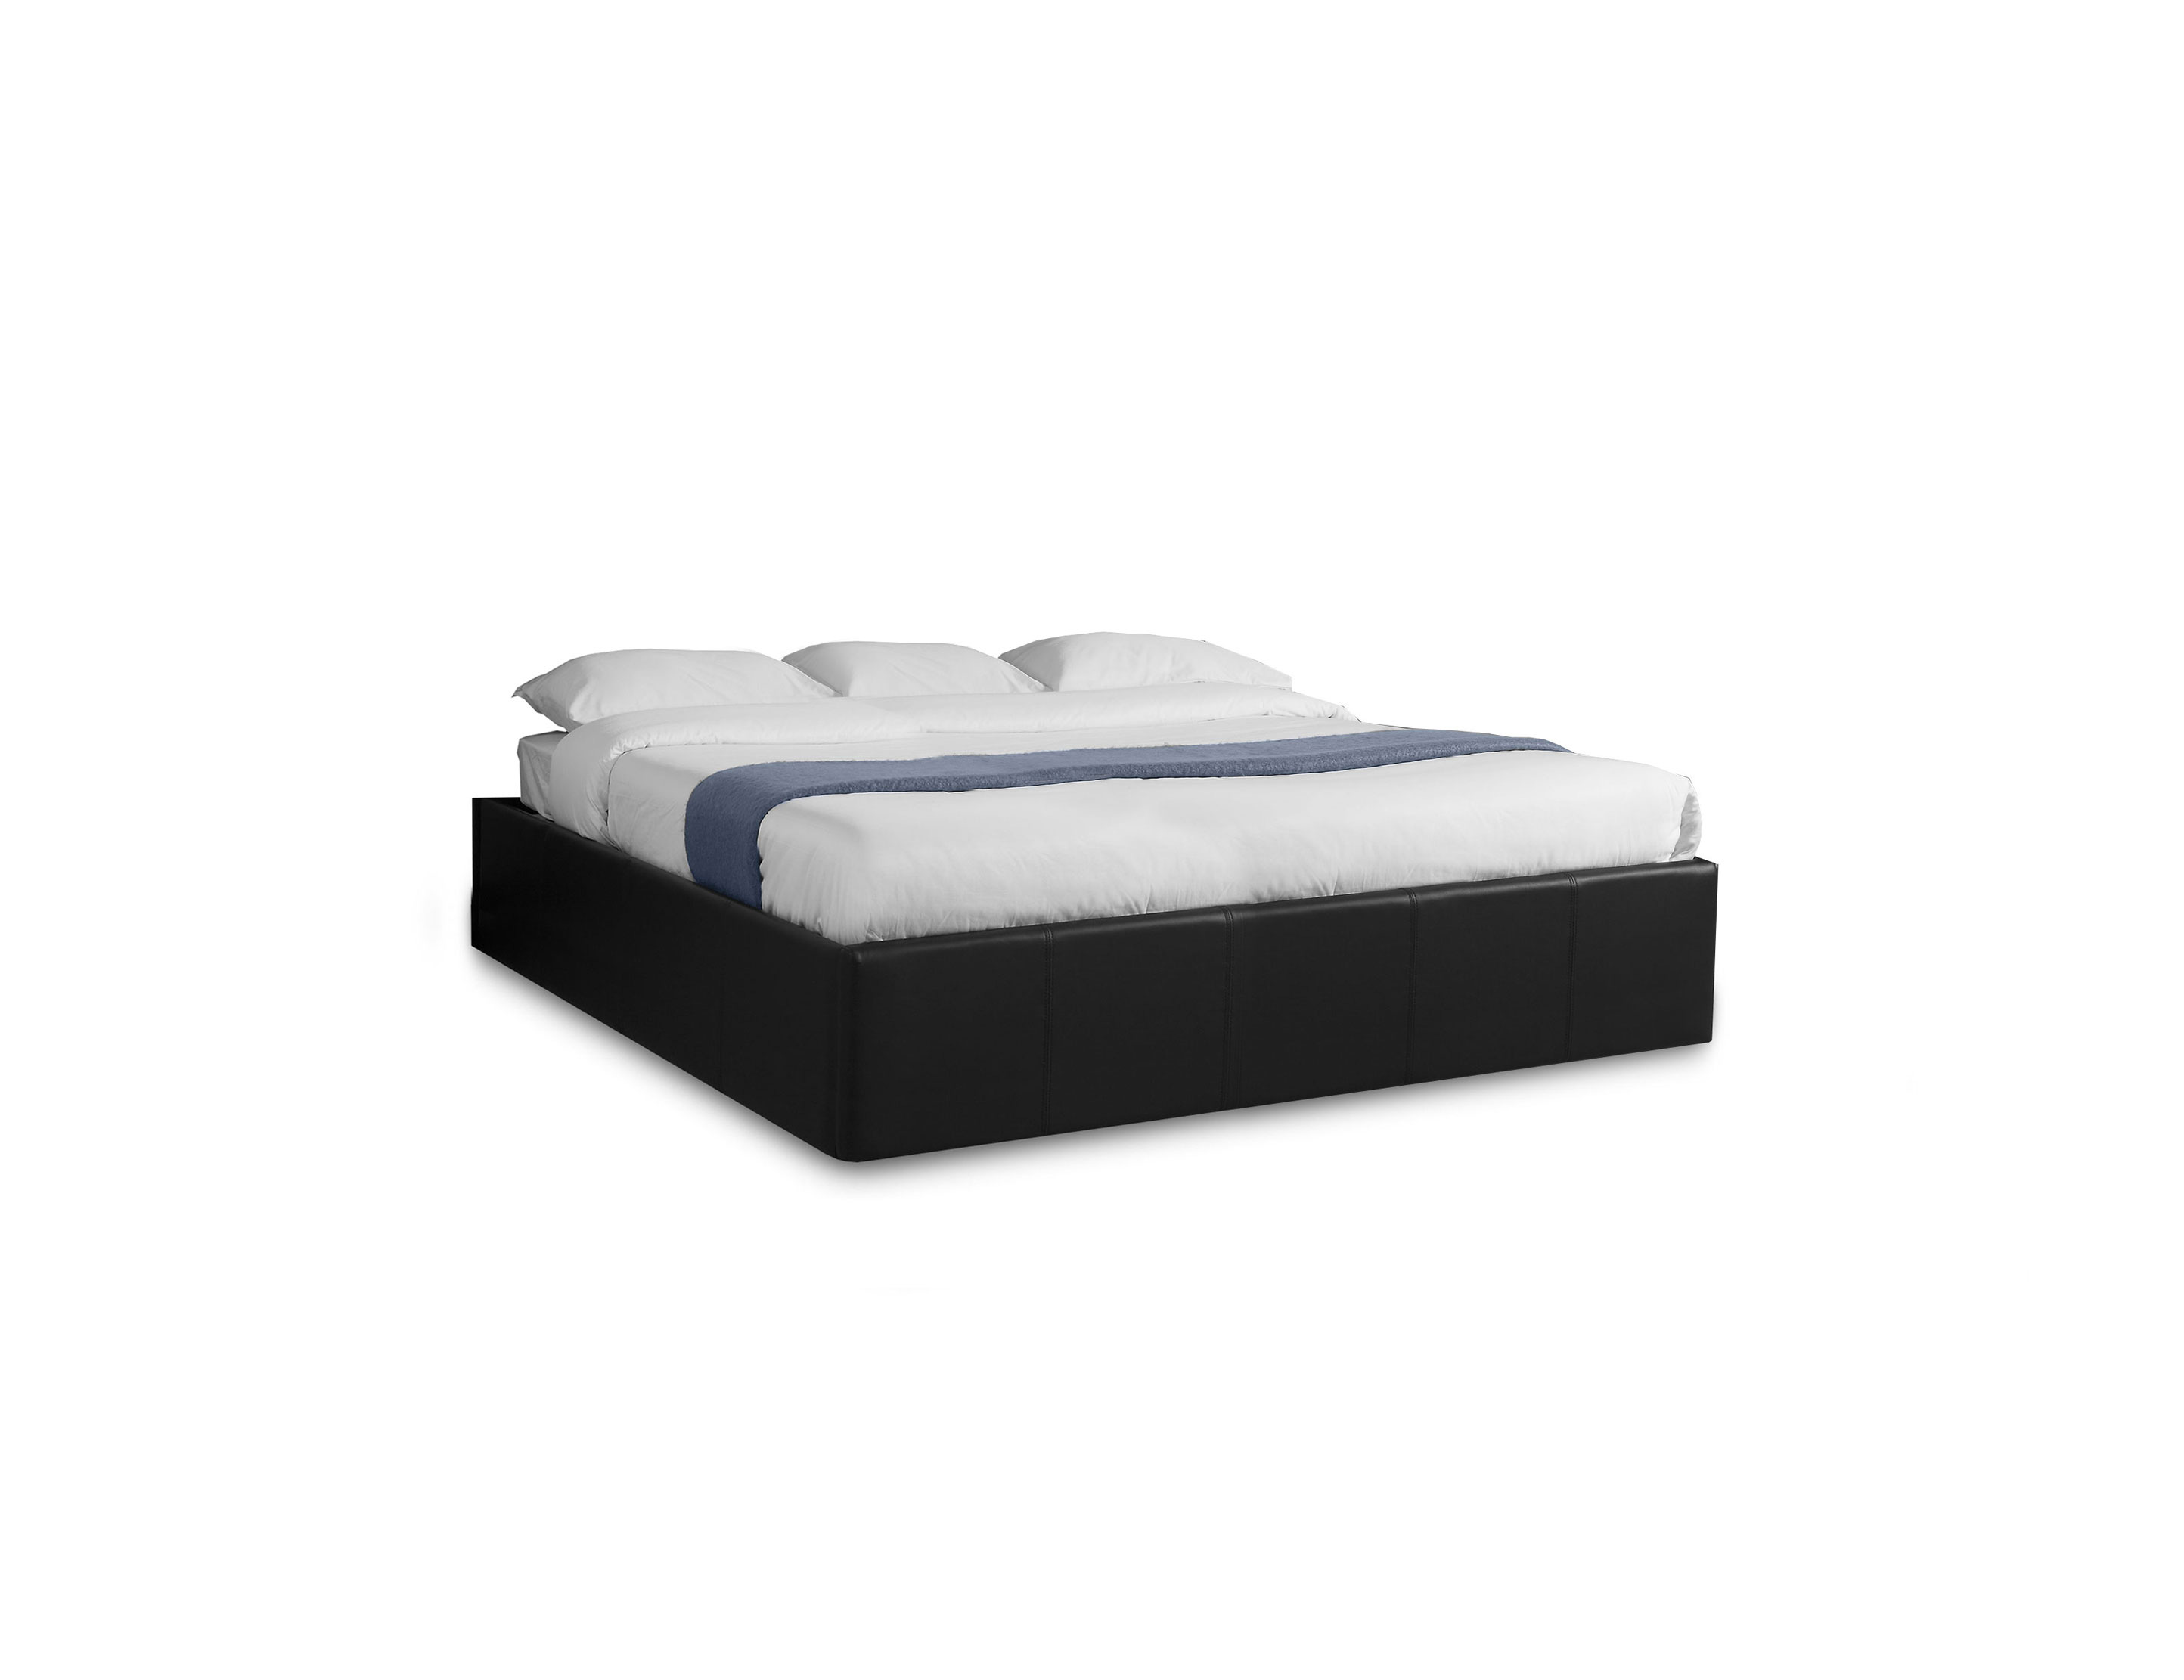 Reveal King Side Lifting Storage Bed, King Size Fold Away Beds